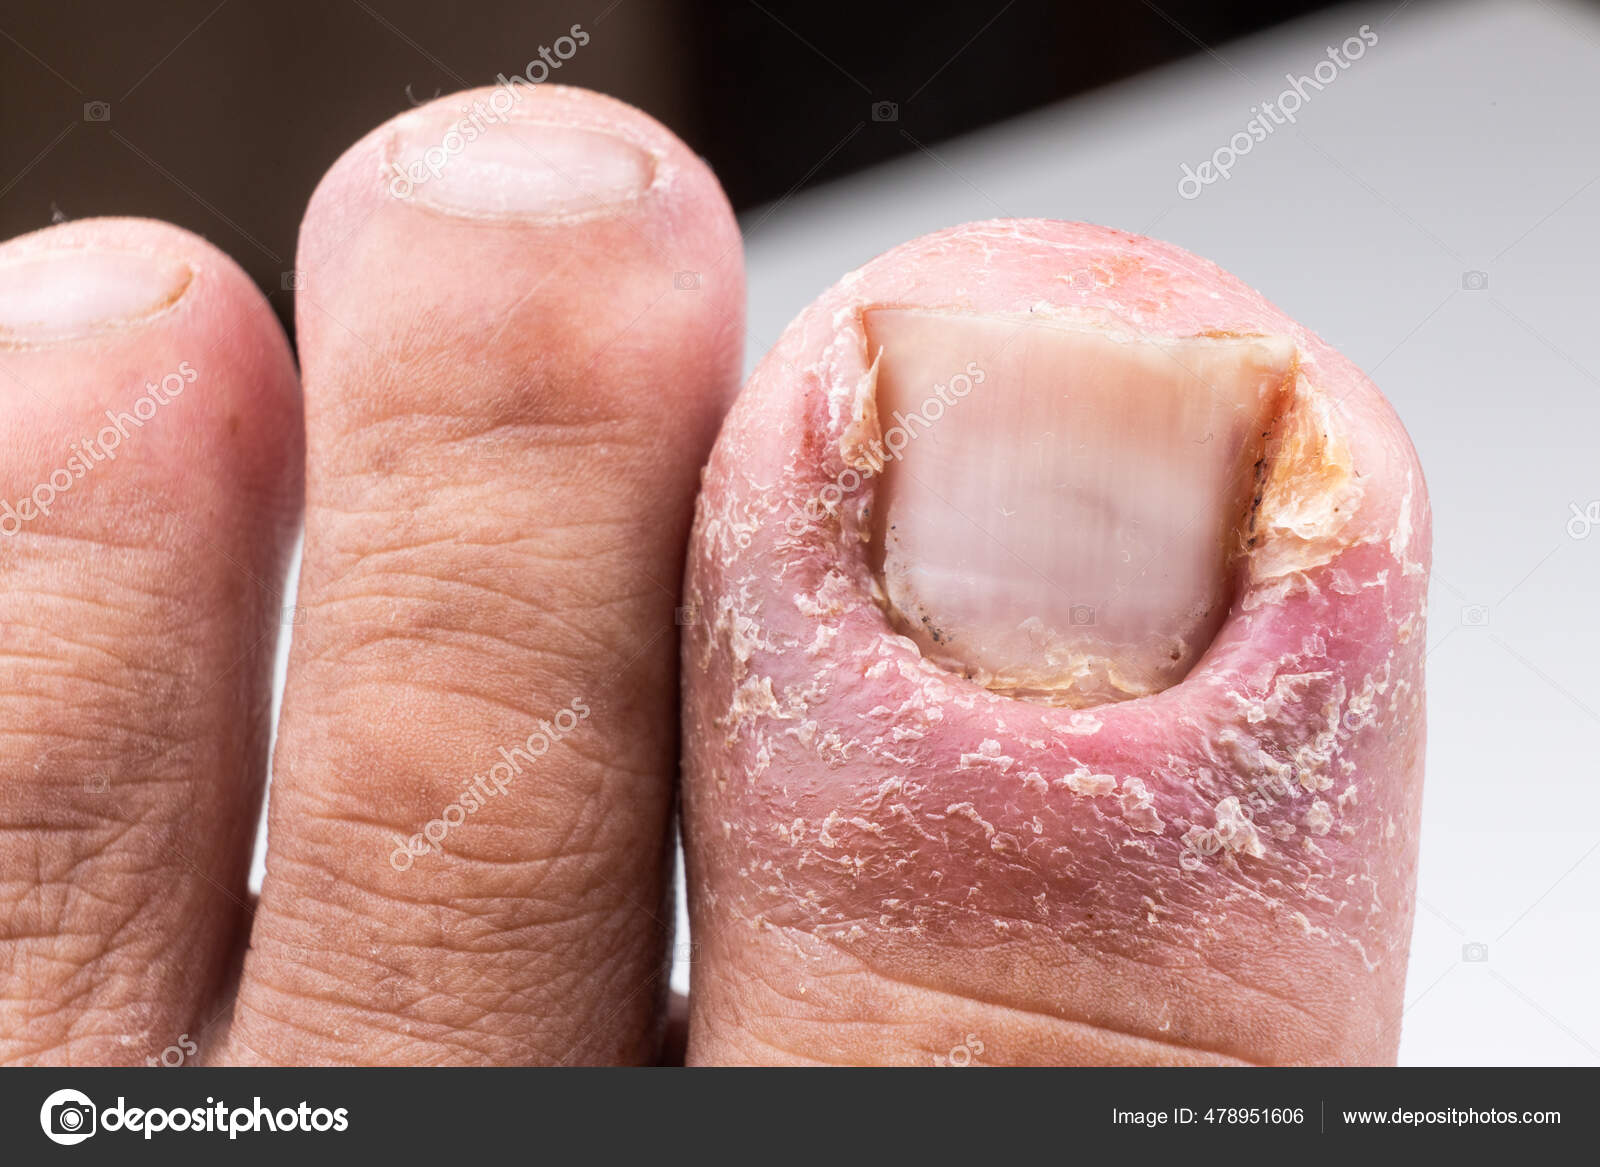 What are Nail Fold Infections (Paronychia)?